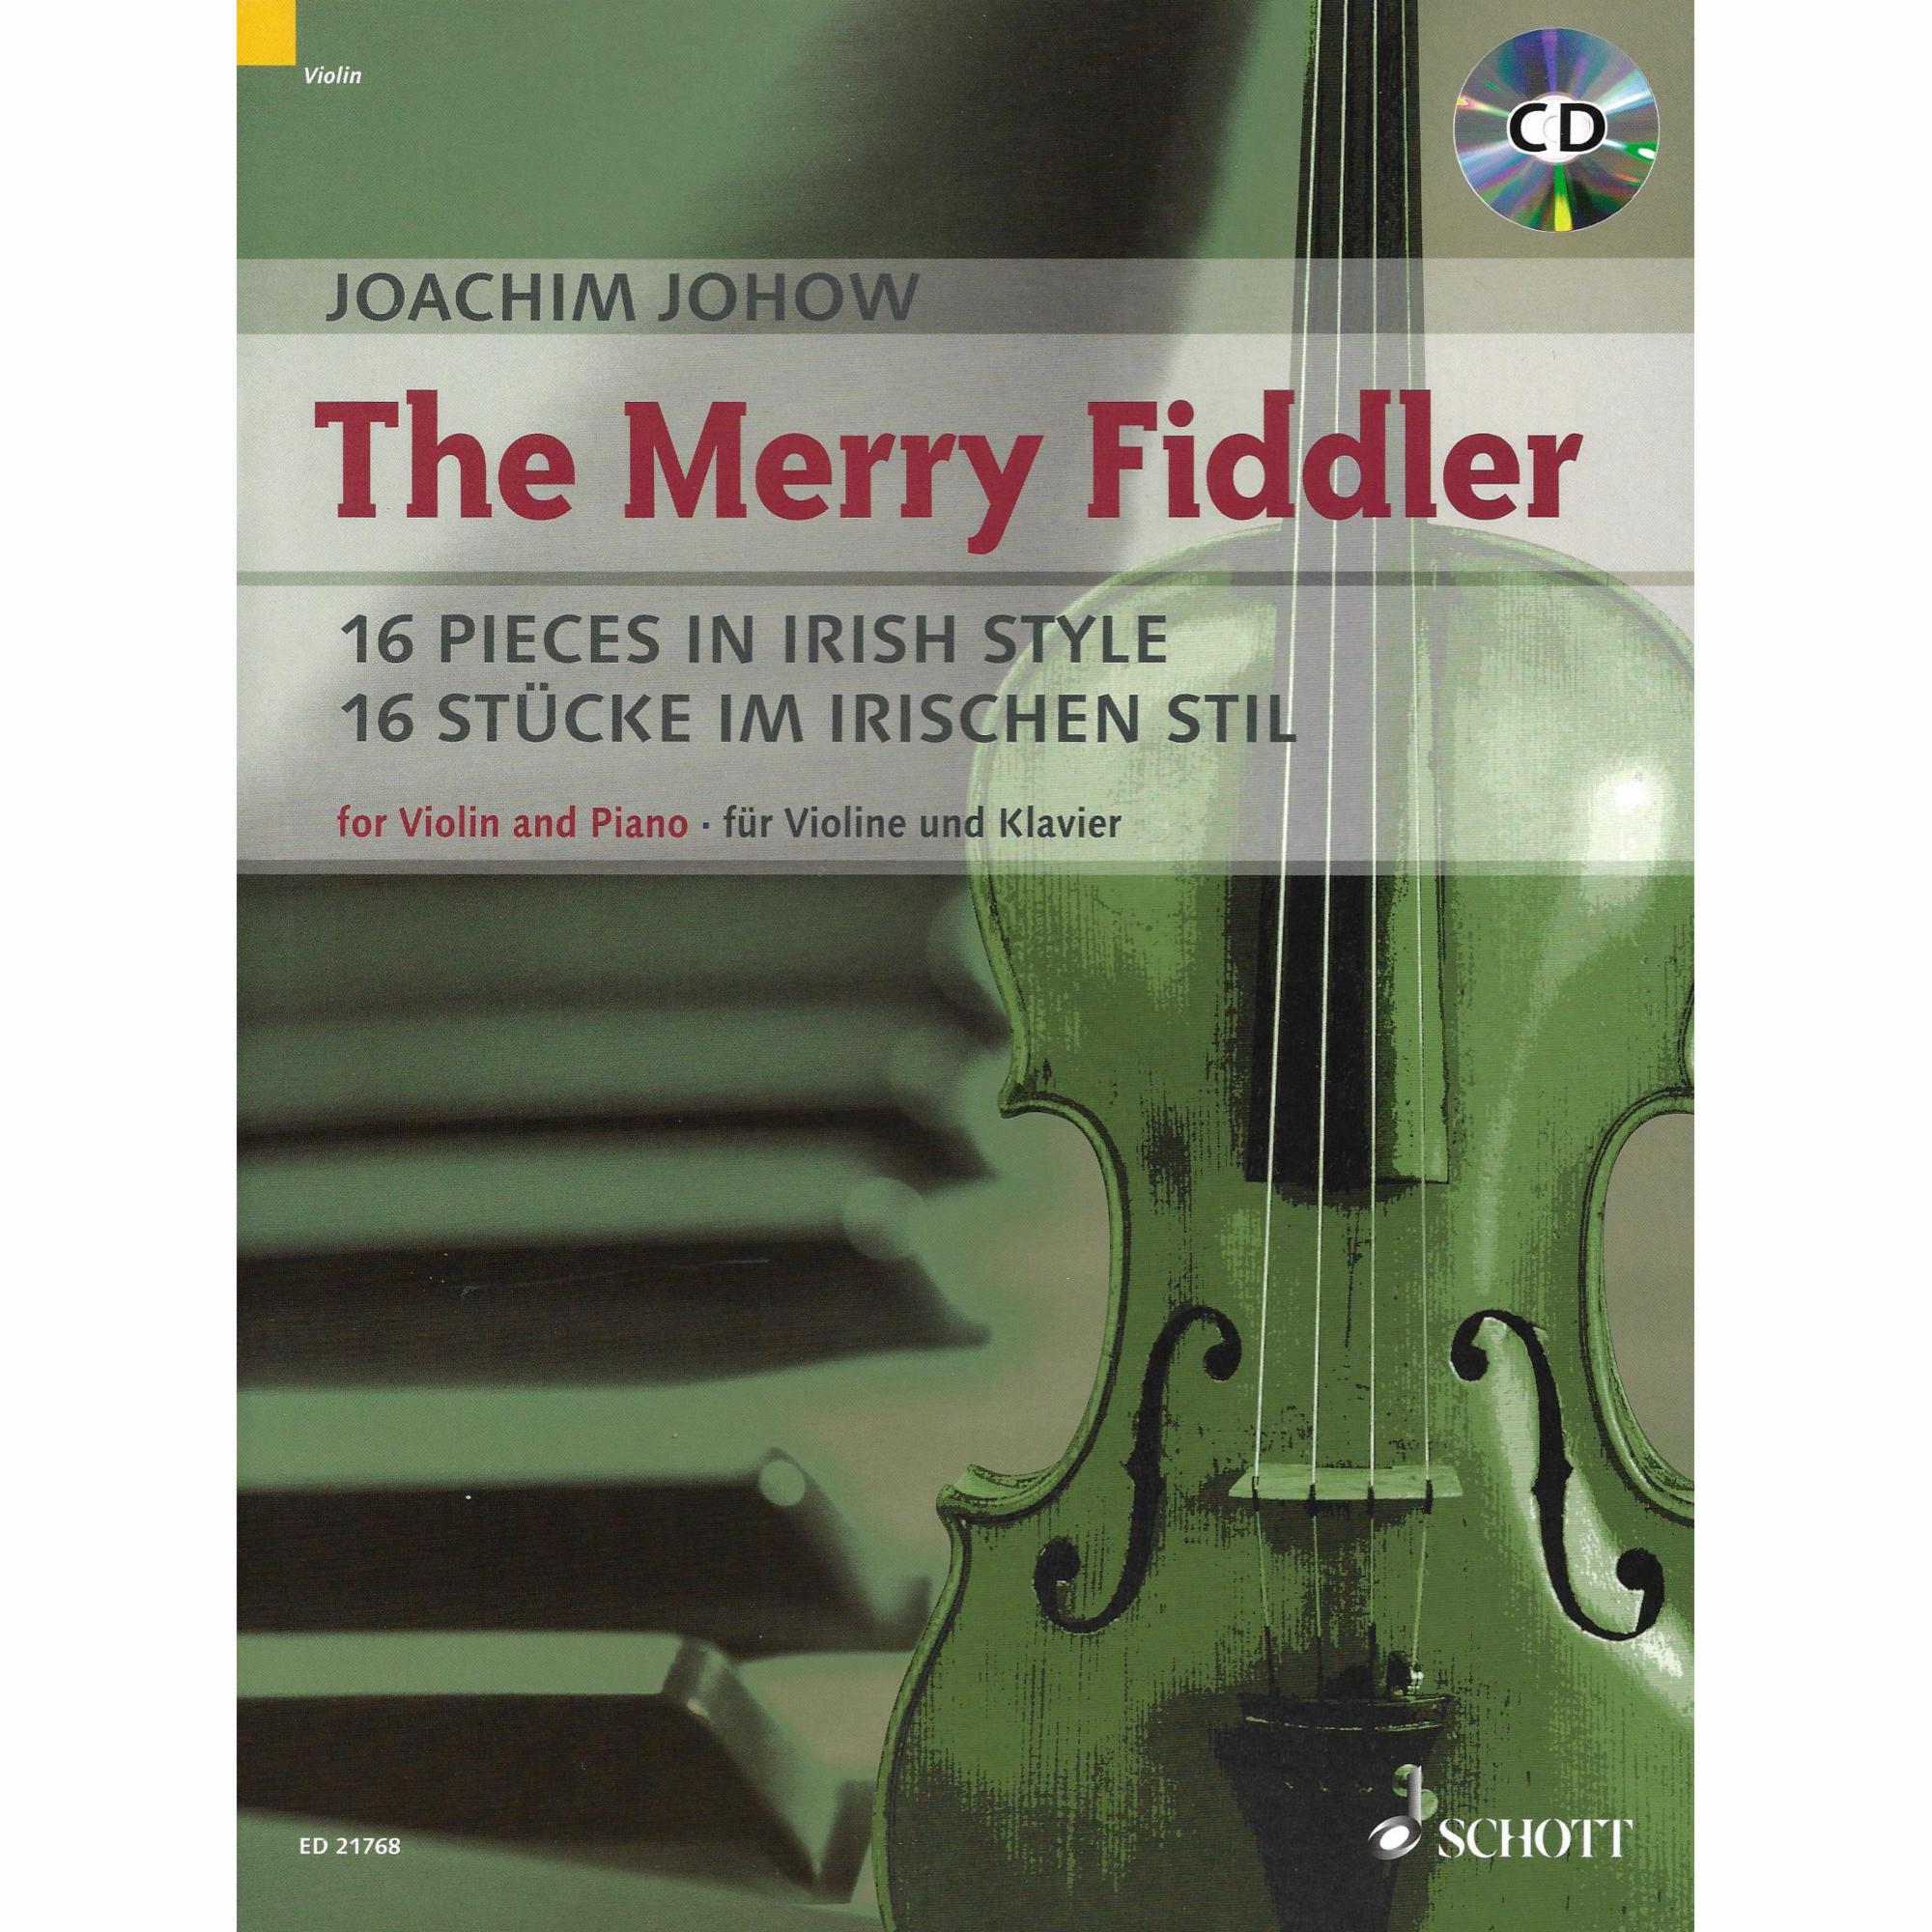 The Merry Fiddler for Violin and Piano